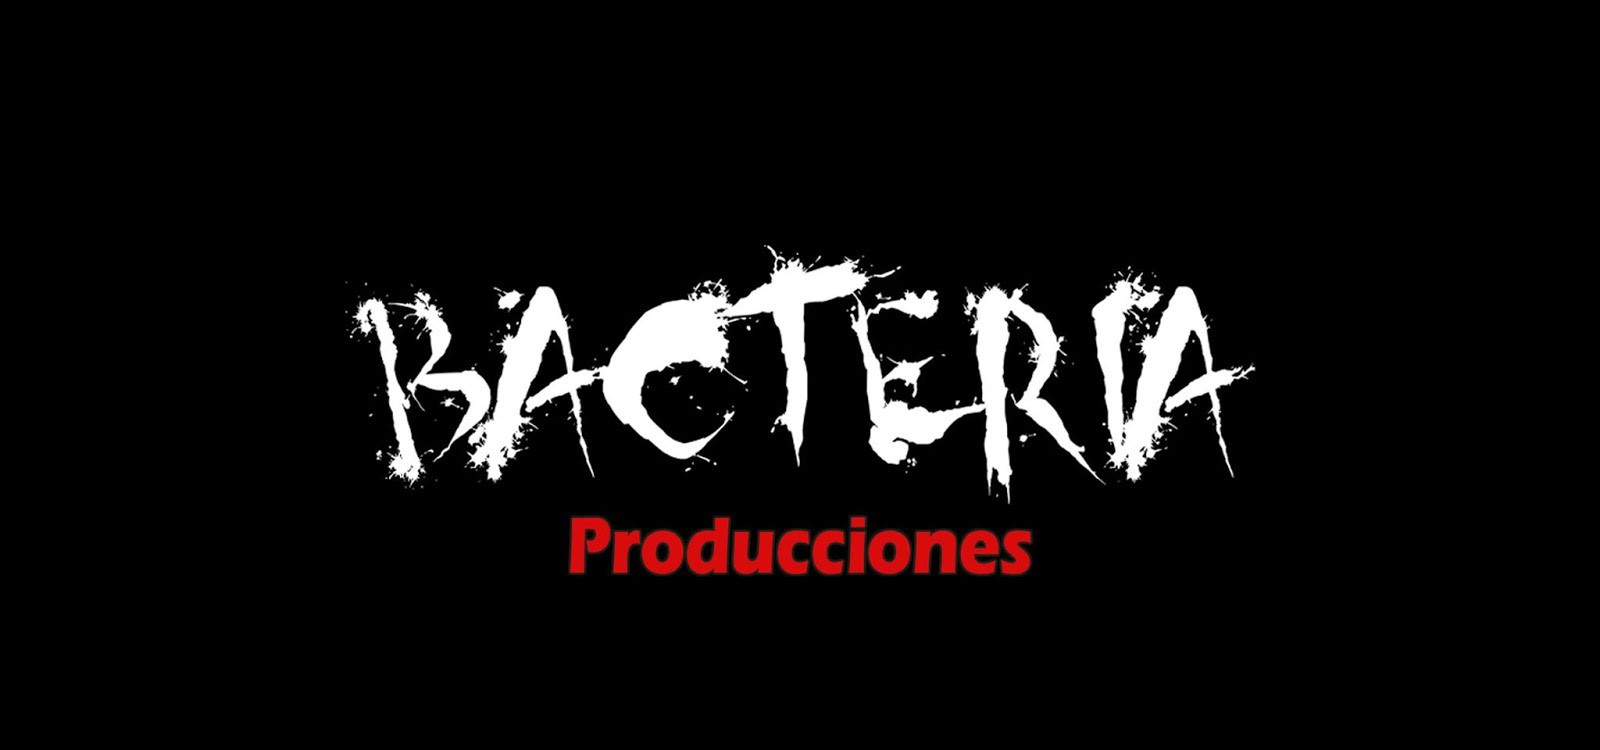 Bacteria podcast